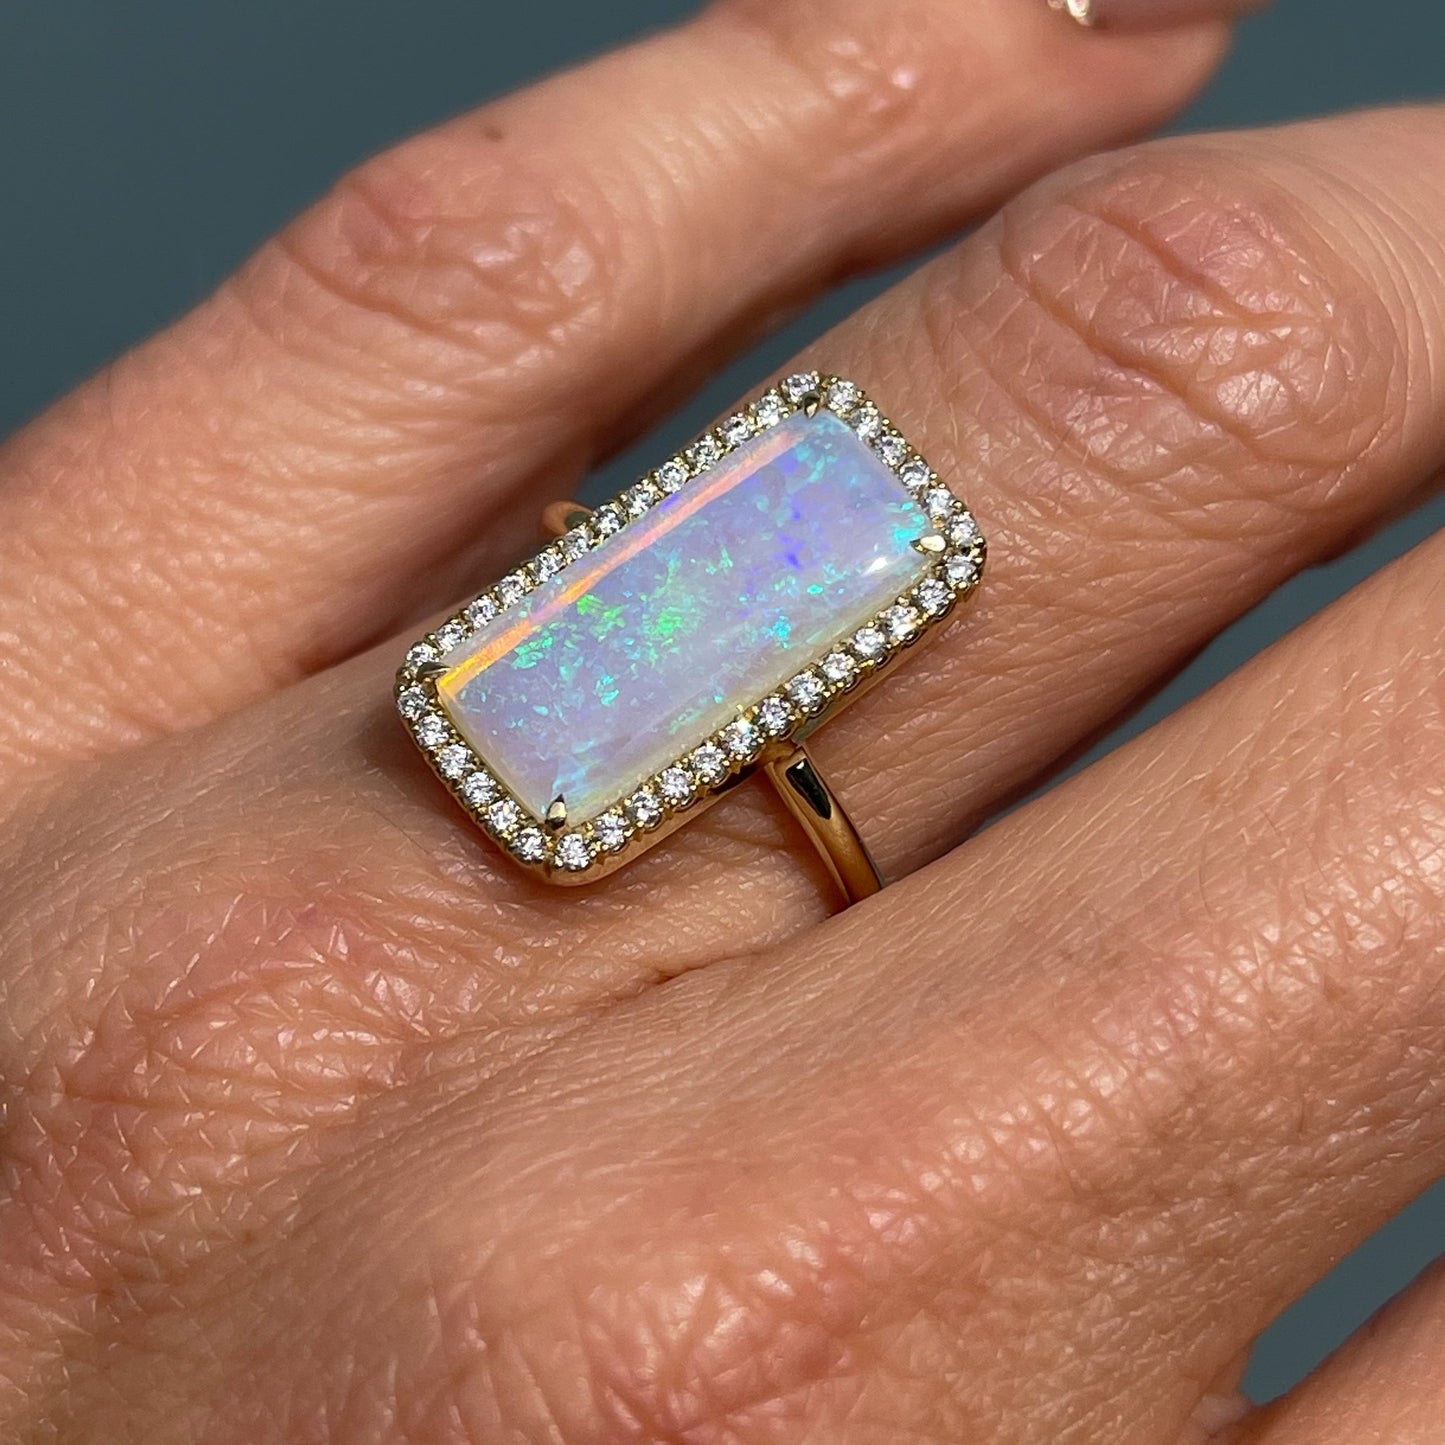 Close up shot of an Australian Opal Ring by NIXIN Jewelry modeled on the hand. Photo shows the lavender opal with green flash and surrounding diamond halo.